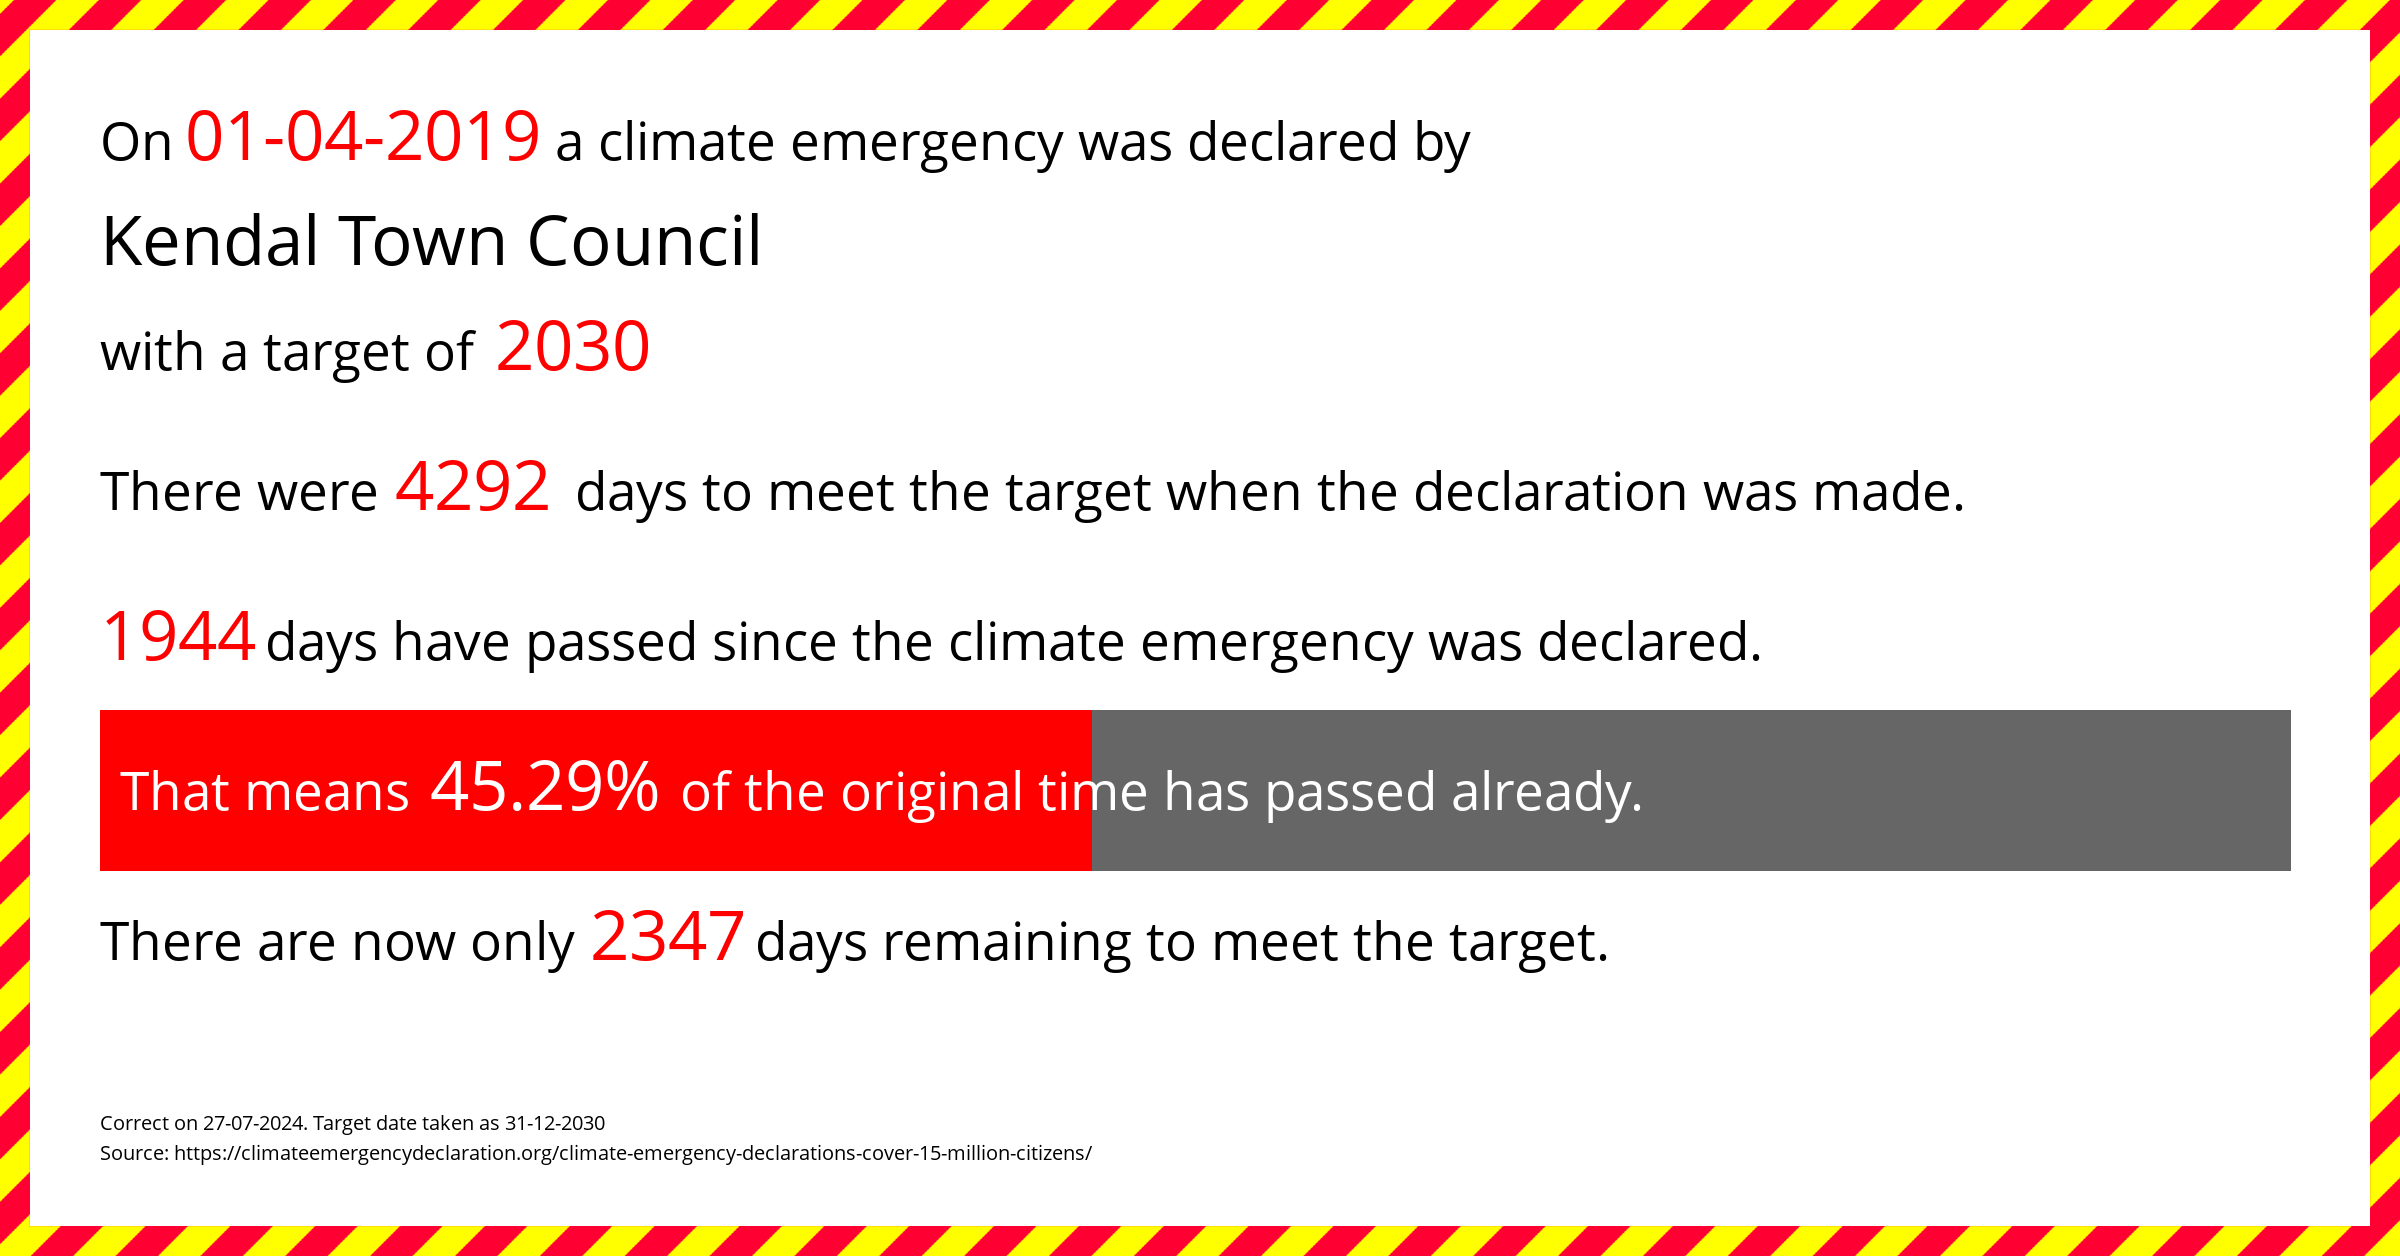 Kendal Town Council declared a Climate emergency on Monday 1st April 2019, with a target of 2030.